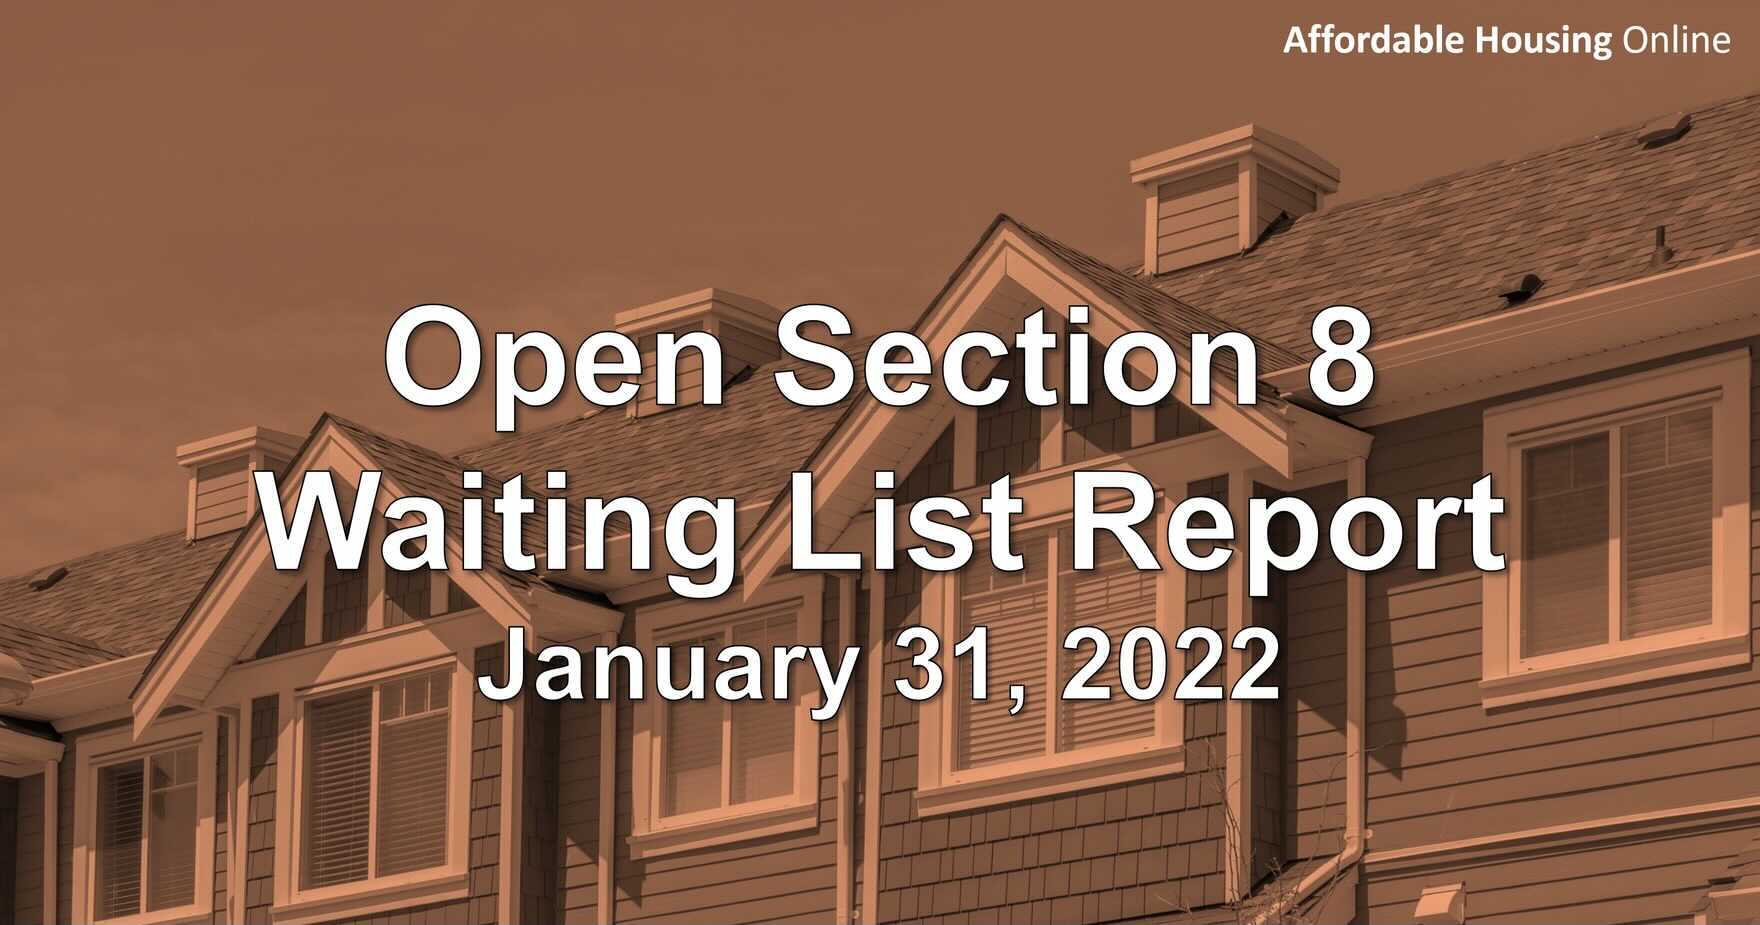 Open Section 8 Waiting List Report Banner image for January 31, 2022